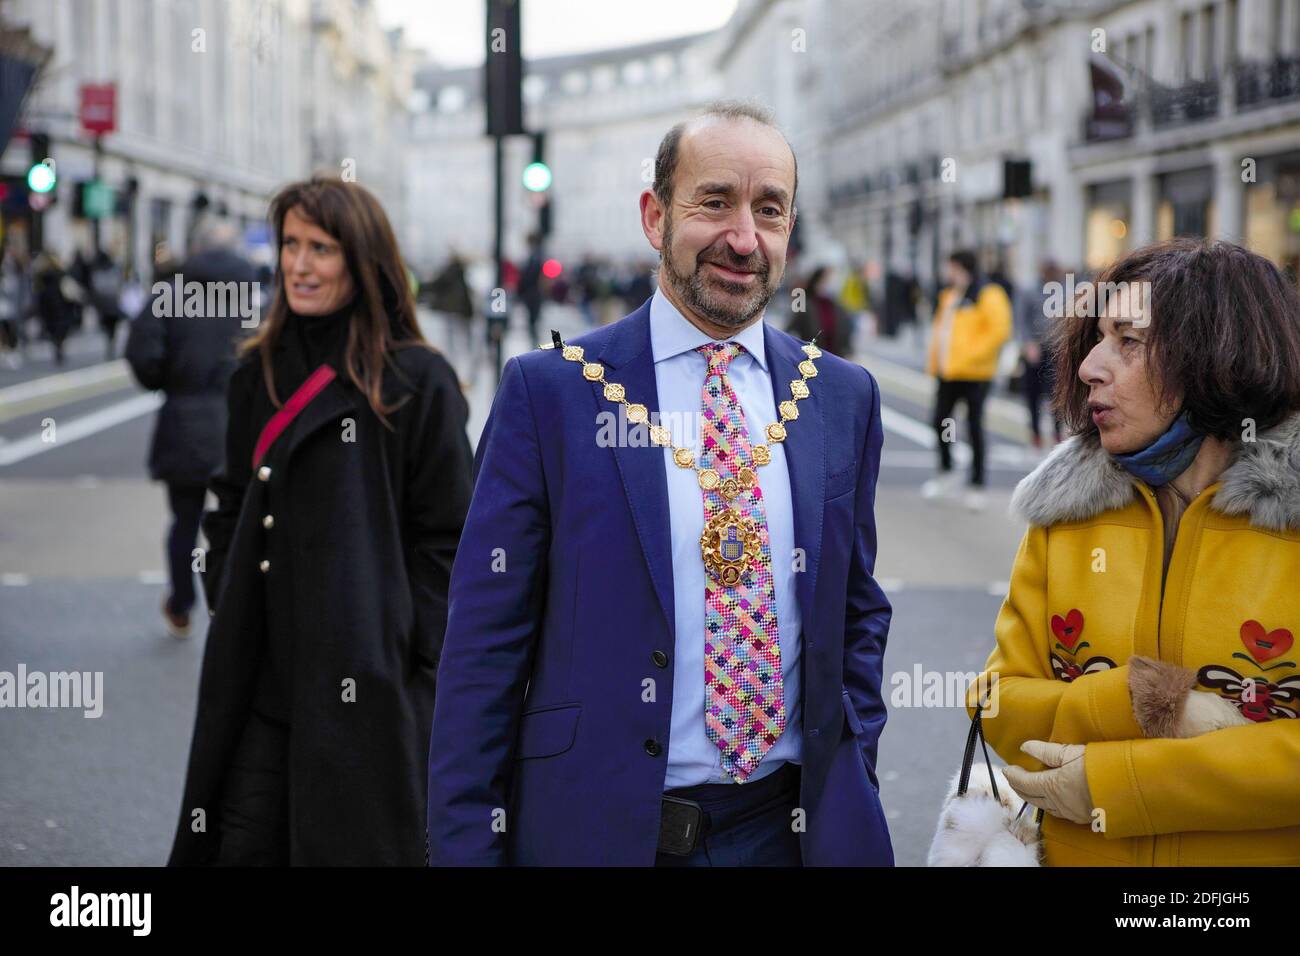 Jonathan Glanz Lord Mayor of Westminster at Westminster City Council strolling in Regent Street which is set to be pedestrianised in the lead up to Christmas in an effort to allow visitors to 'shop comfortably and view Christmas installations. Stock Photo